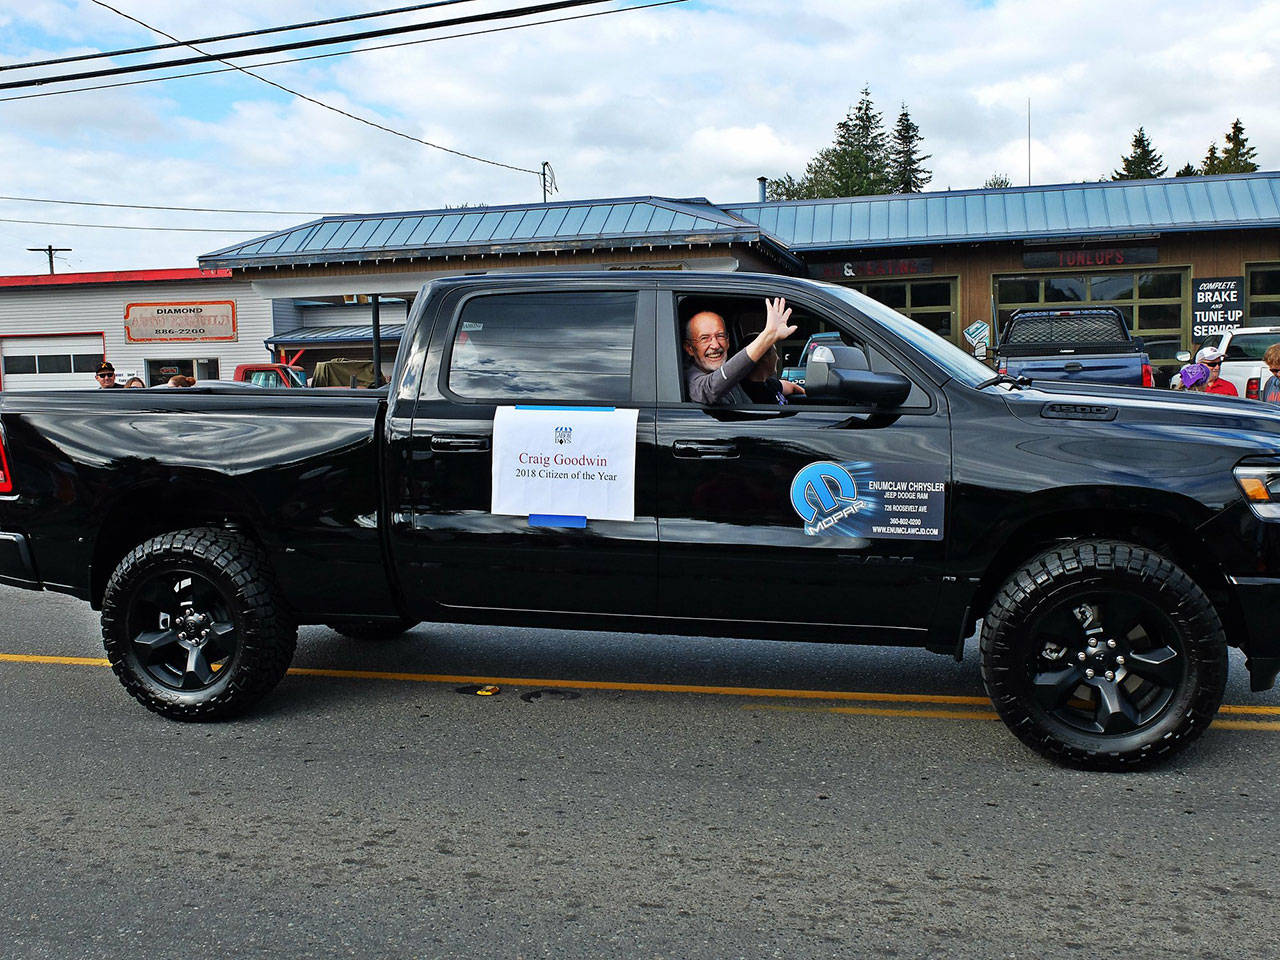 Craig Goodwin in Black Diamond’s 2018 Labor Day Parade, celebrating being nominated as Citizen of the Year. Image courtesy Craig Goodwin